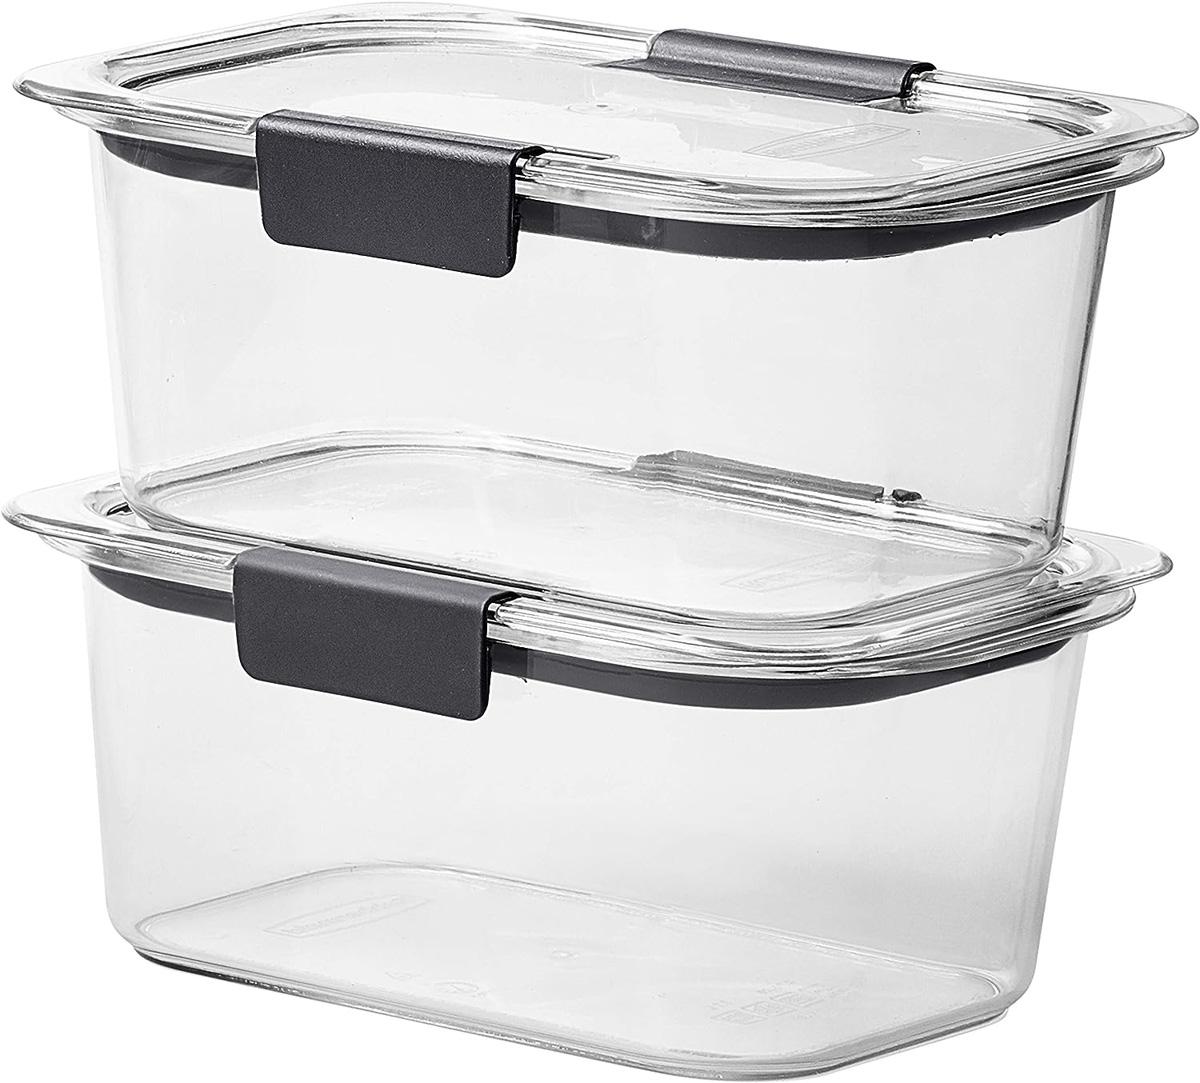 Rubbermaid Brilliance Food Storage Containers with Lids 2 Set for $9.98